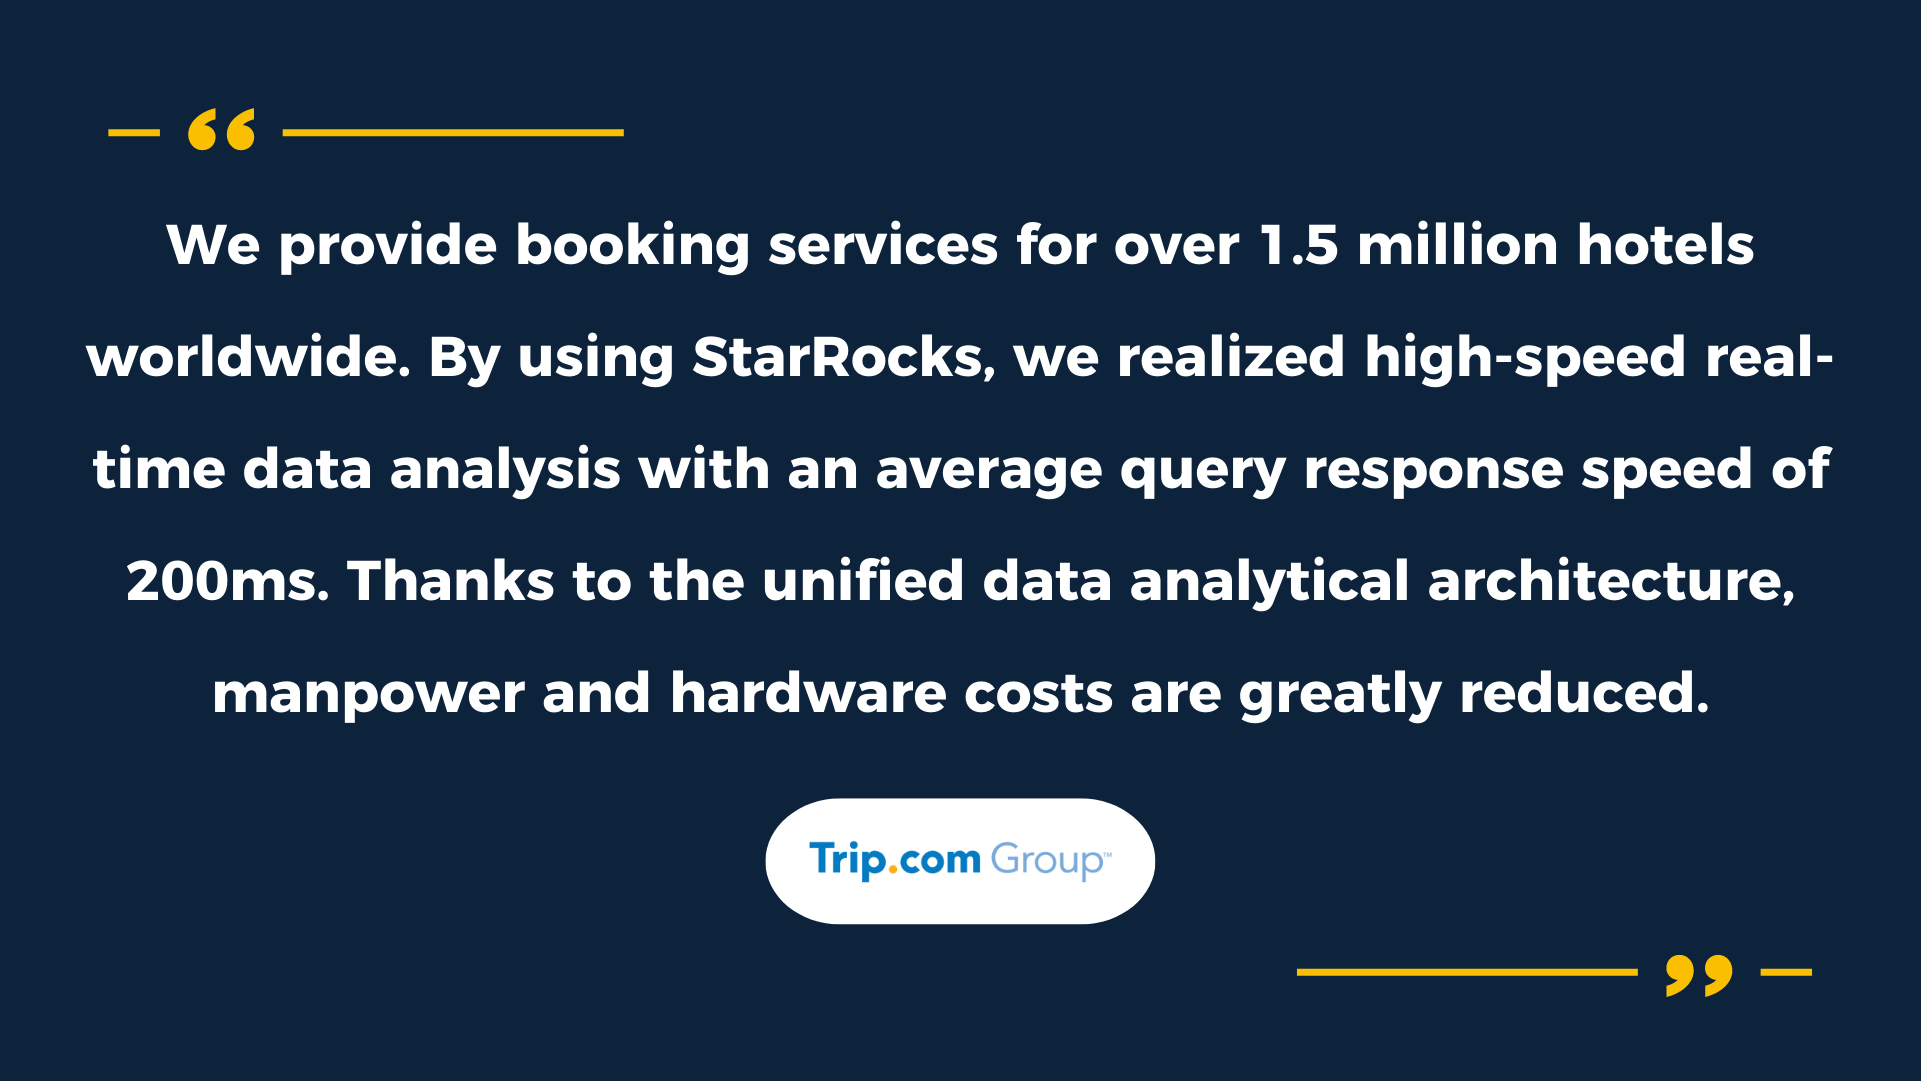 We provide booking services for over 1.5 million hotels worldwide. By using StarRocks, we realized high-speed real-time data analysis with an average query response speed of 200ms. Thanks to the unified data analytic